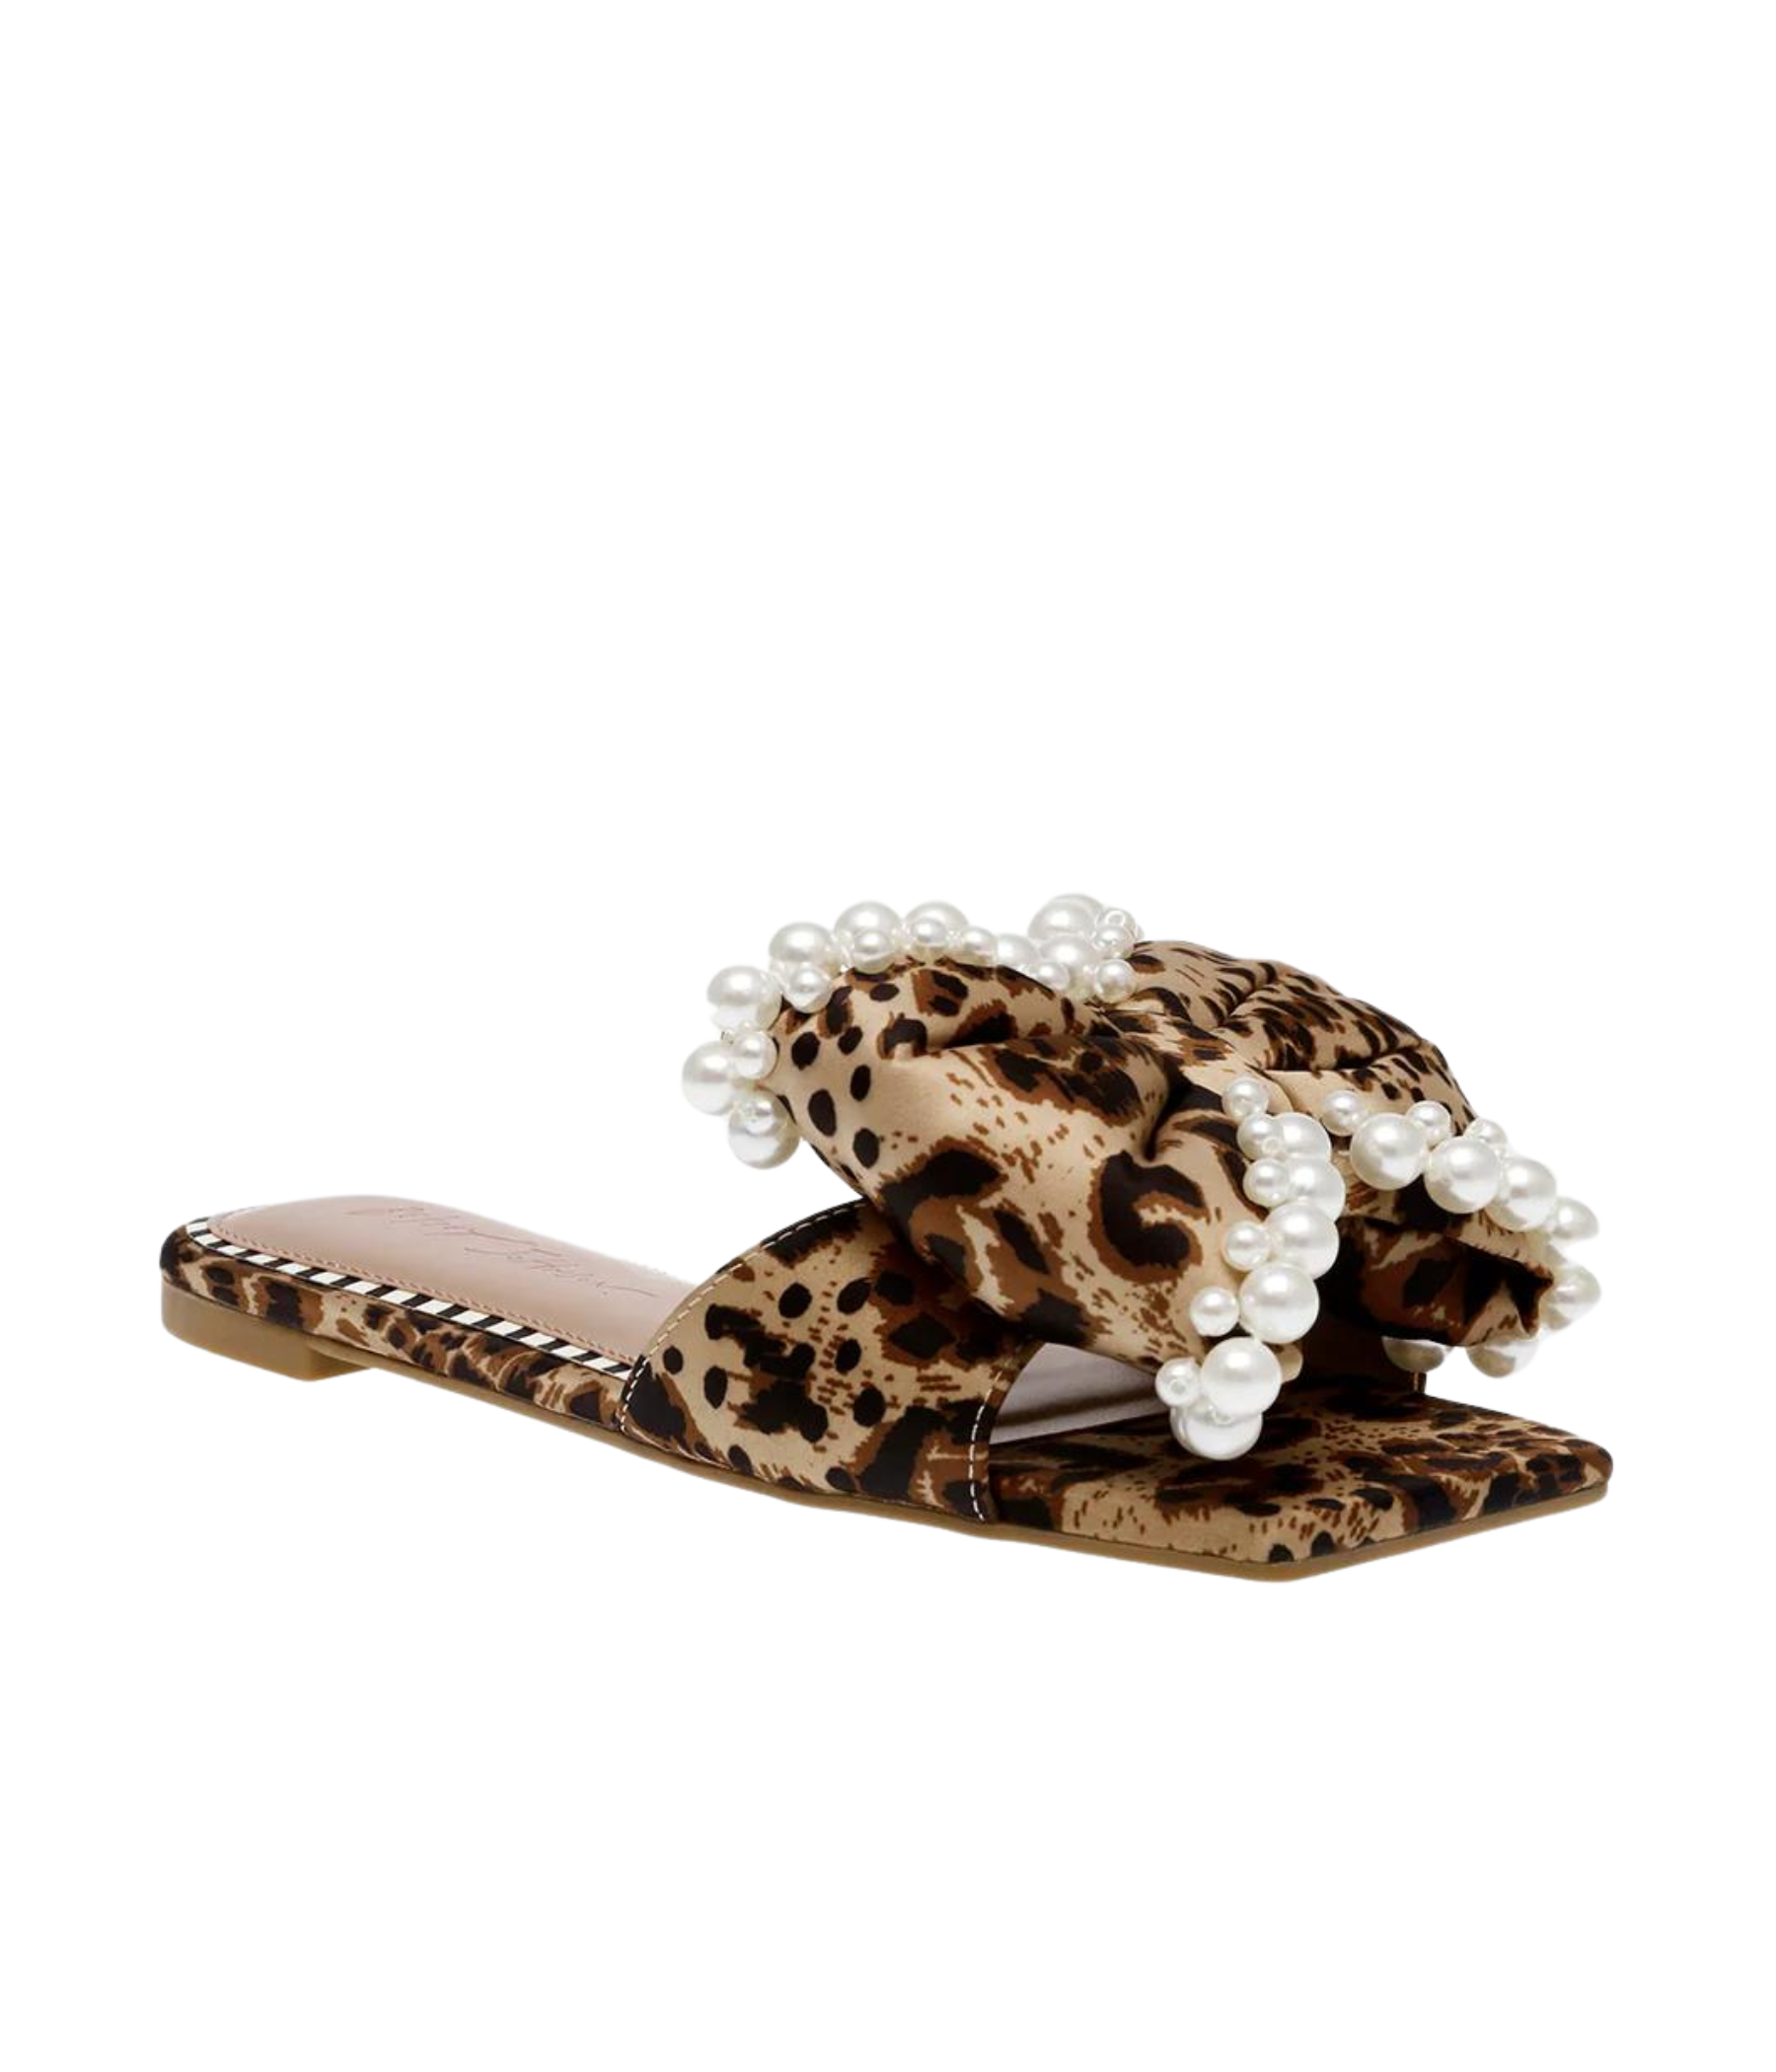 Liah Leopard Bow Sandals with Pearls